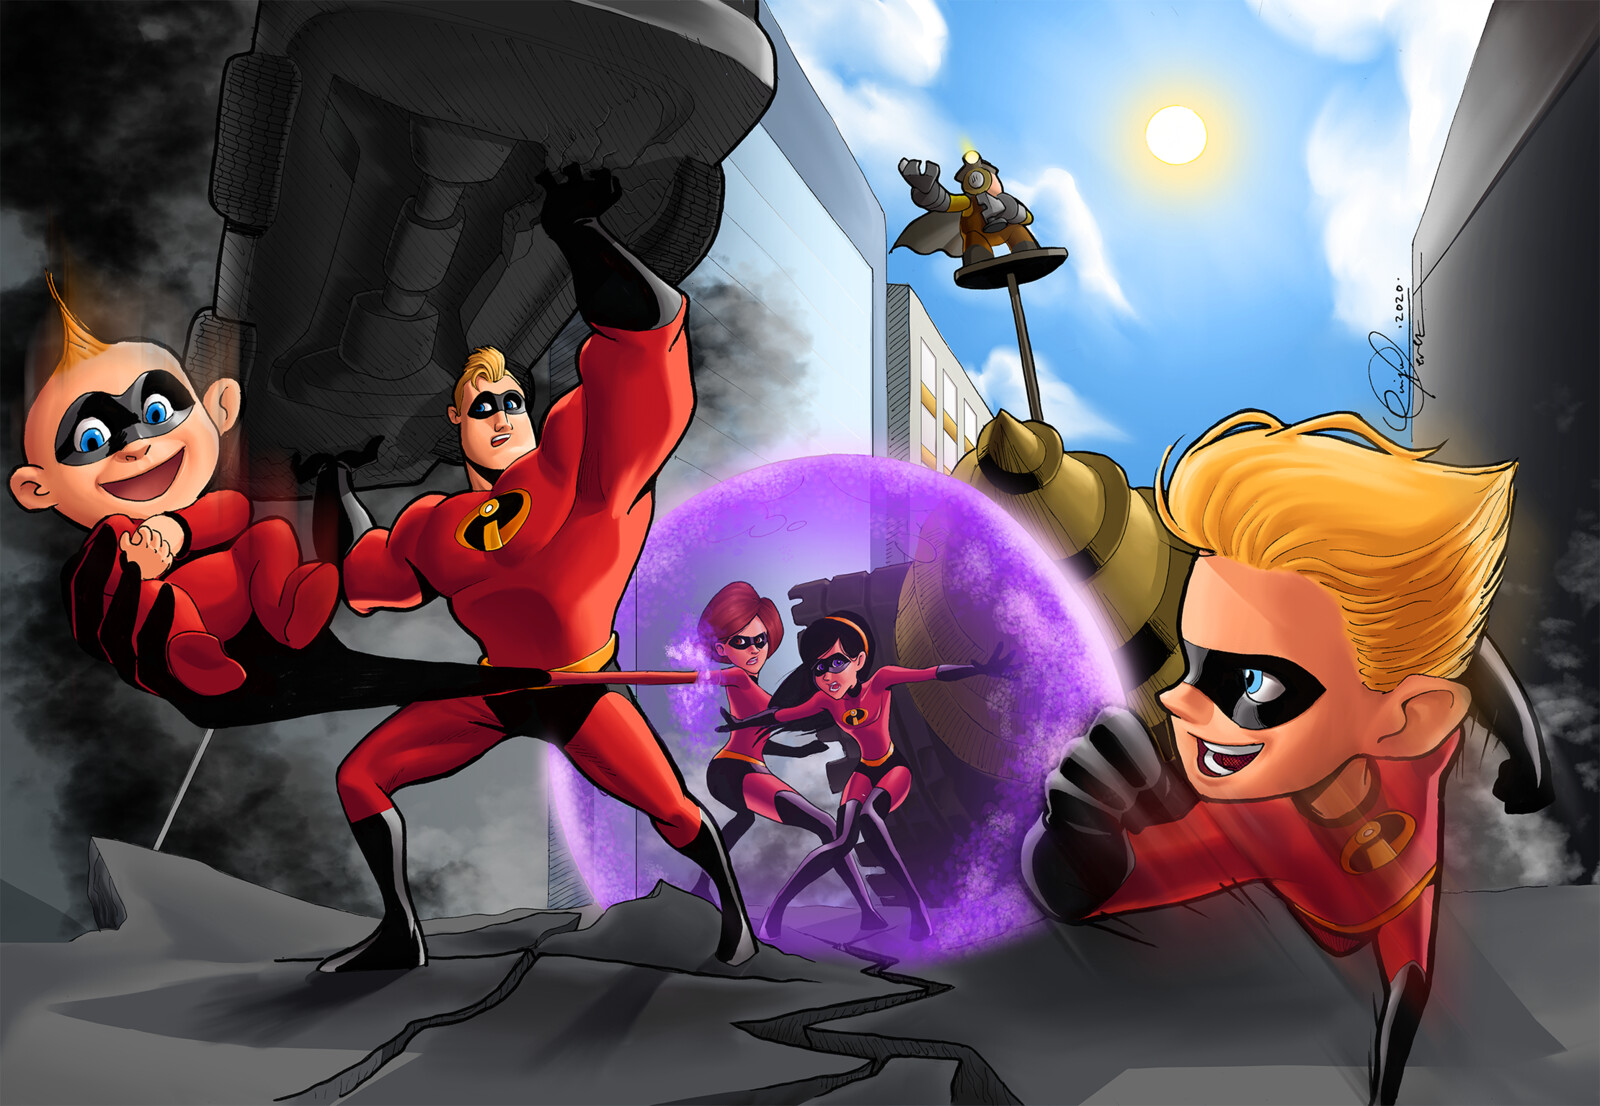 Incredibles 2 - The Return! (2018 recolored in 2020)